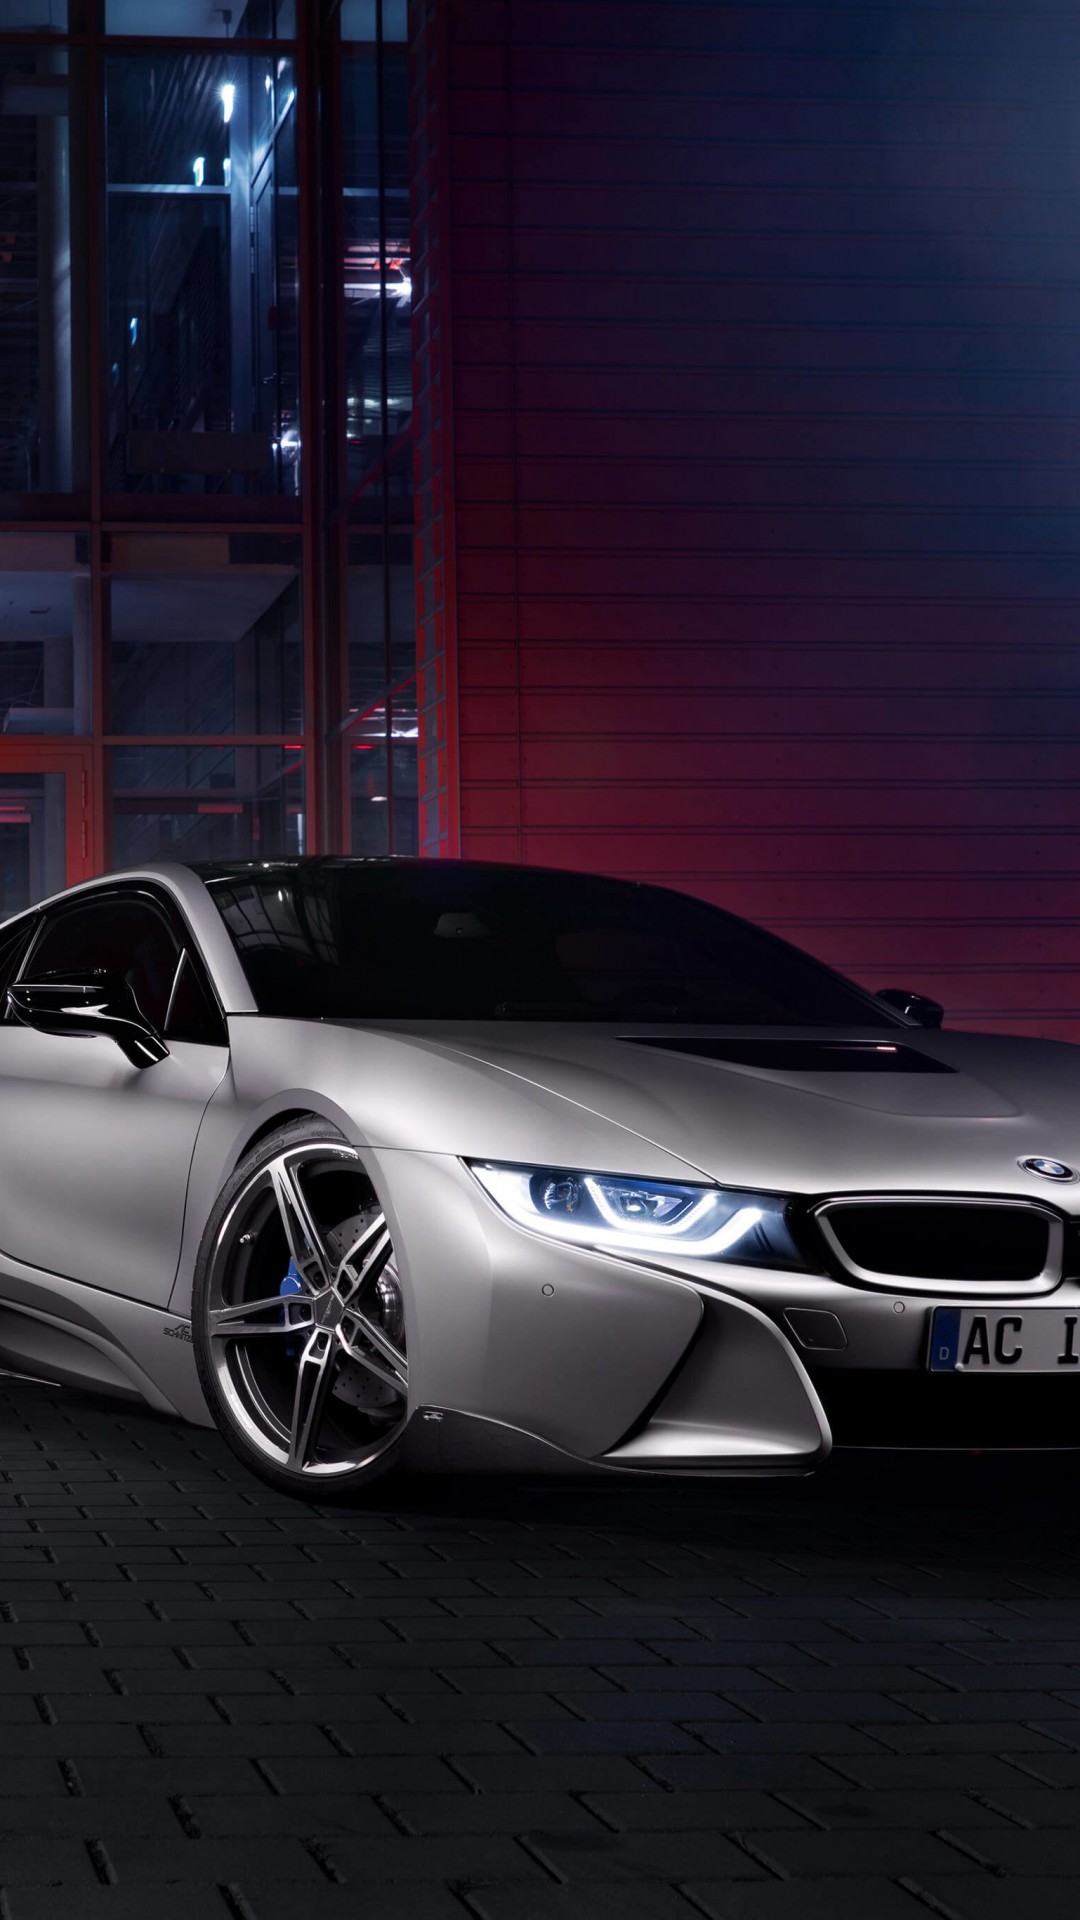 BMW i8 designed by AC Schnitzer Wallpaper for SAMSUNG Galaxy S5